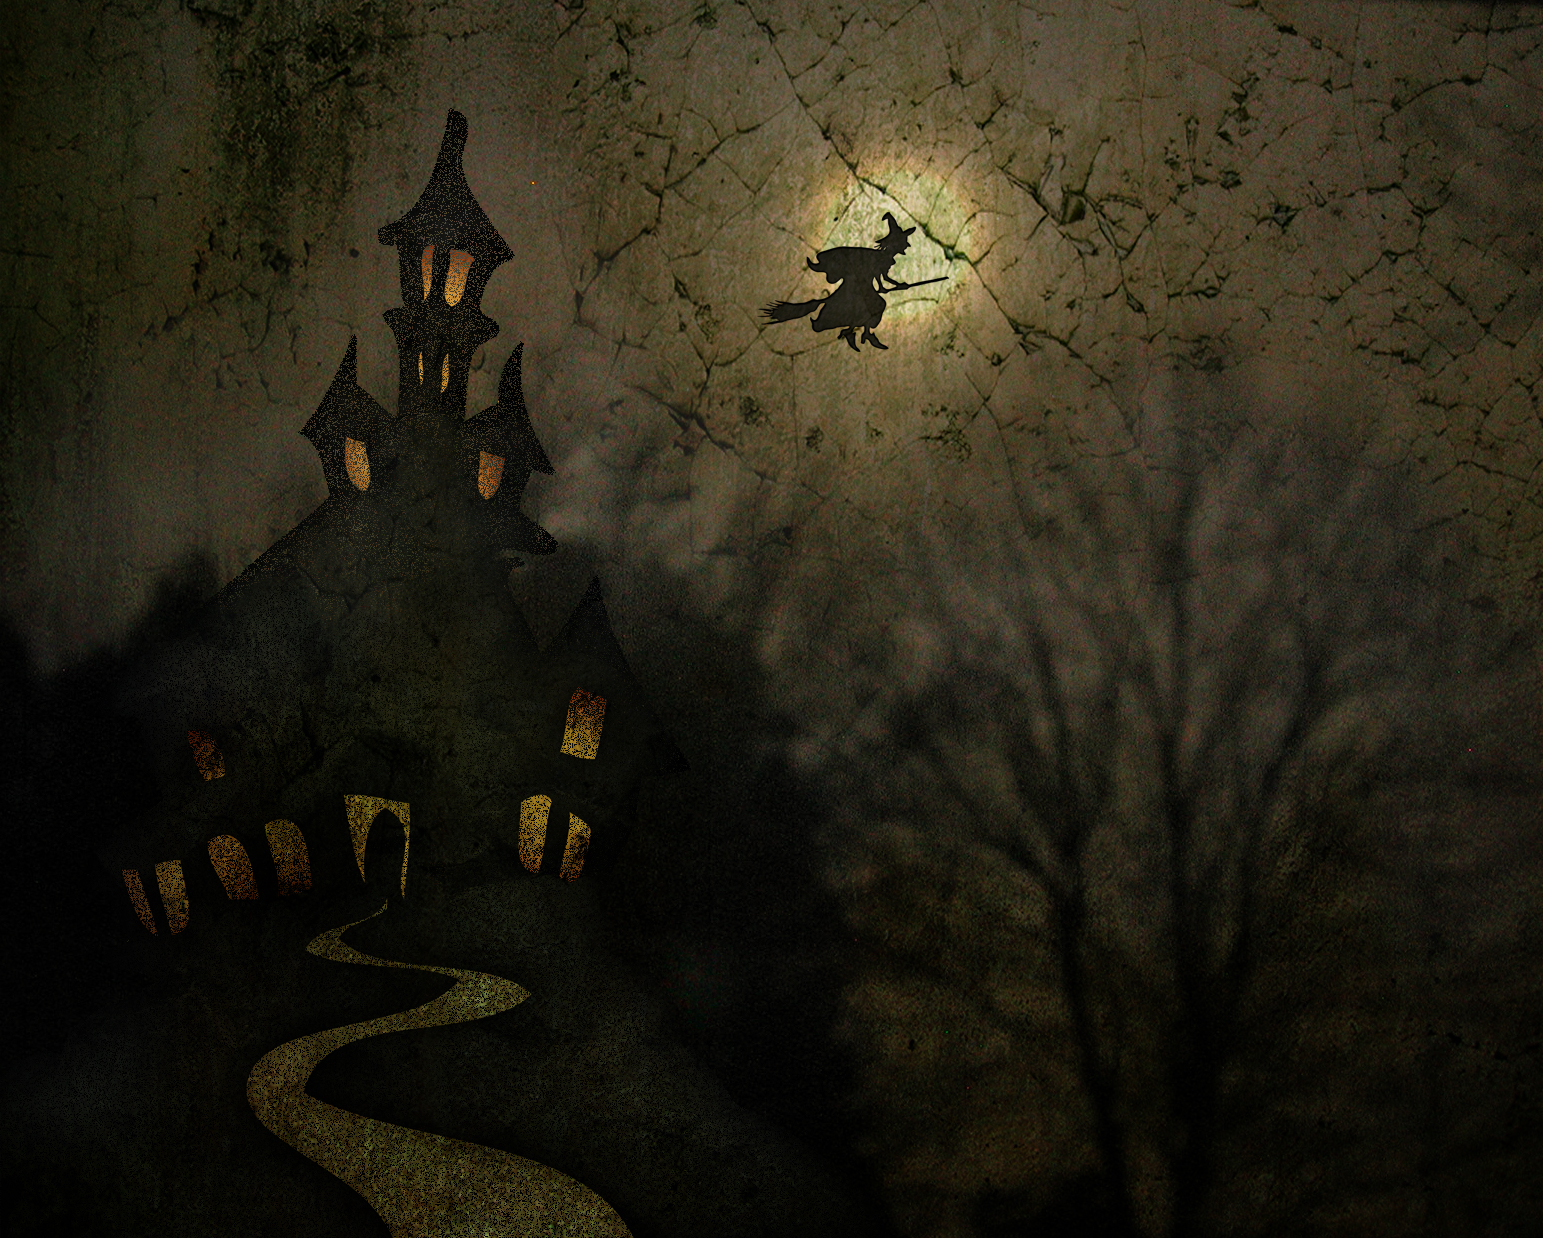 painting of an illuminated castle at night with a fairy riding a broom